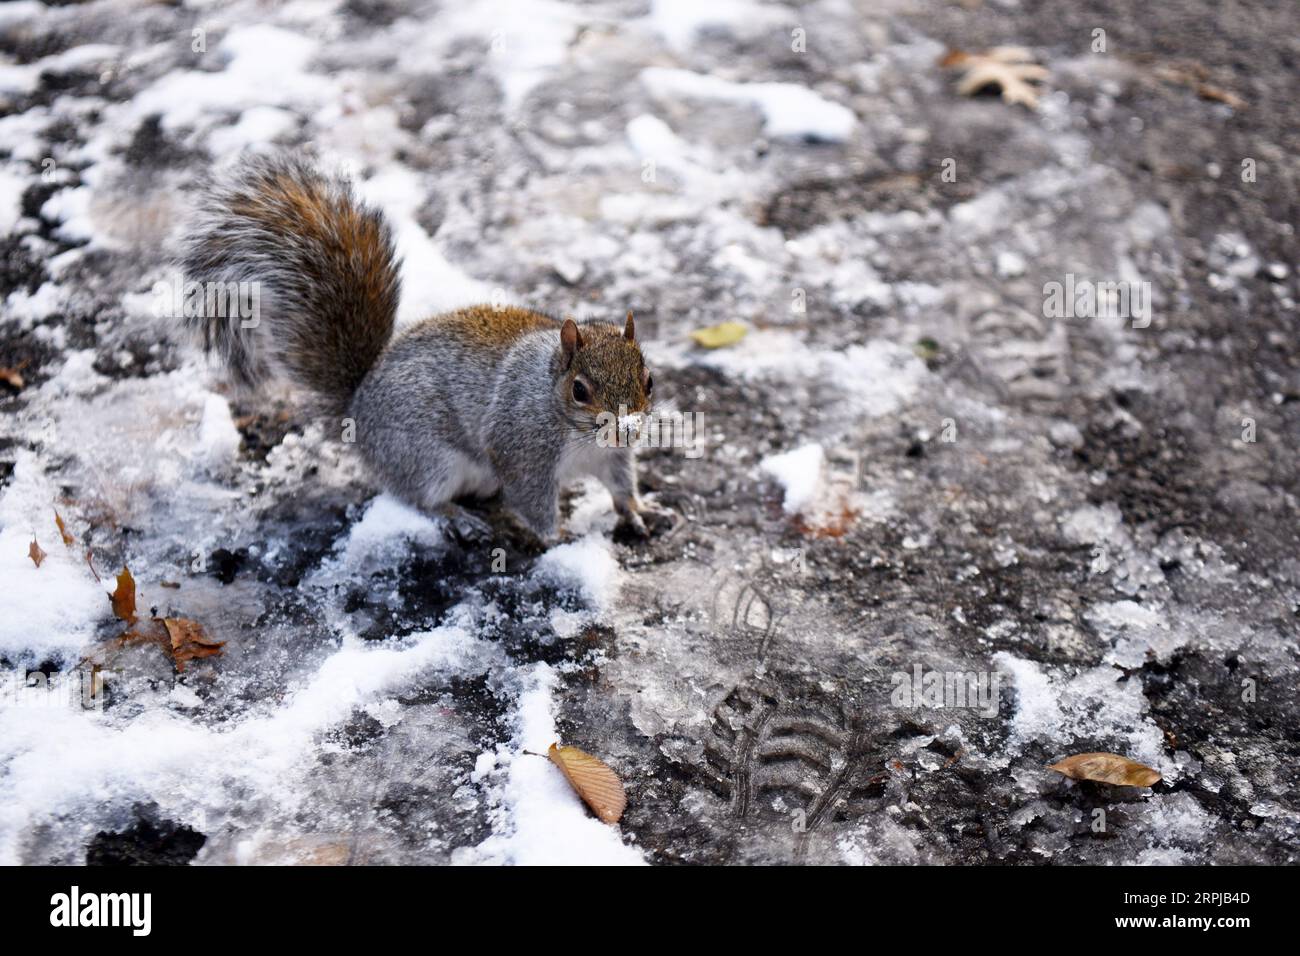 191203 -- NEW YORK, Dec. 3, 2019 -- A squirrel is pictured after a snowfall in Central Park in New York, the United States, on Dec. 3, 2019. The first snowfall of the season hit New York City on Monday.  U.S.-NEW YORK-CENTRAL PARK-SNOW HanxFang PUBLICATIONxNOTxINxCHN Stock Photo